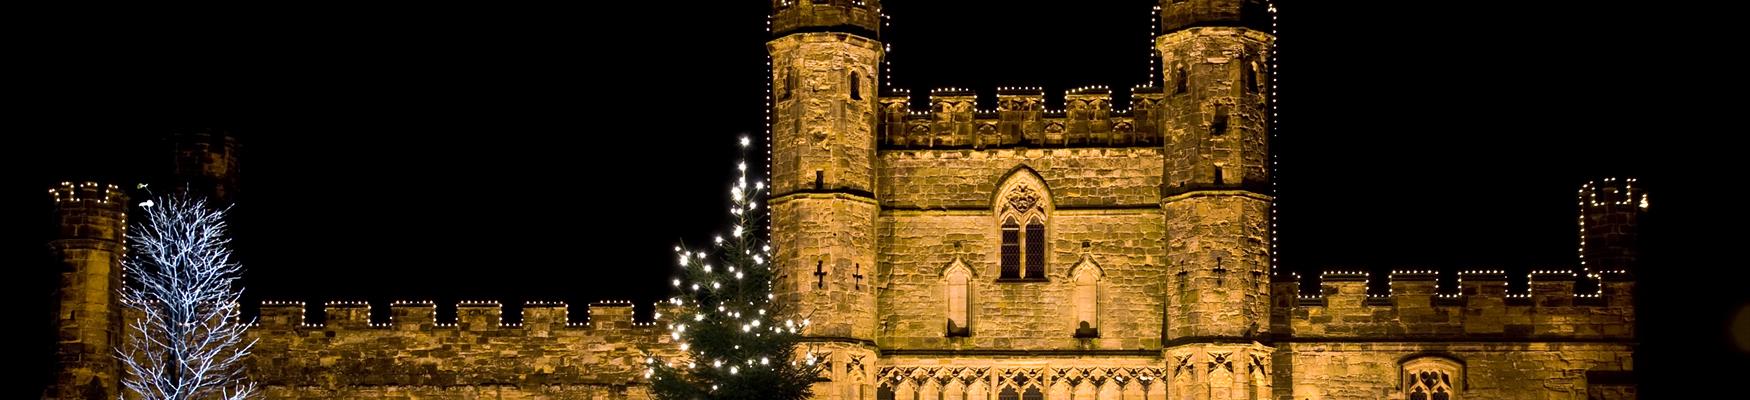 Battle Abbey gatehouse with Christmas tree